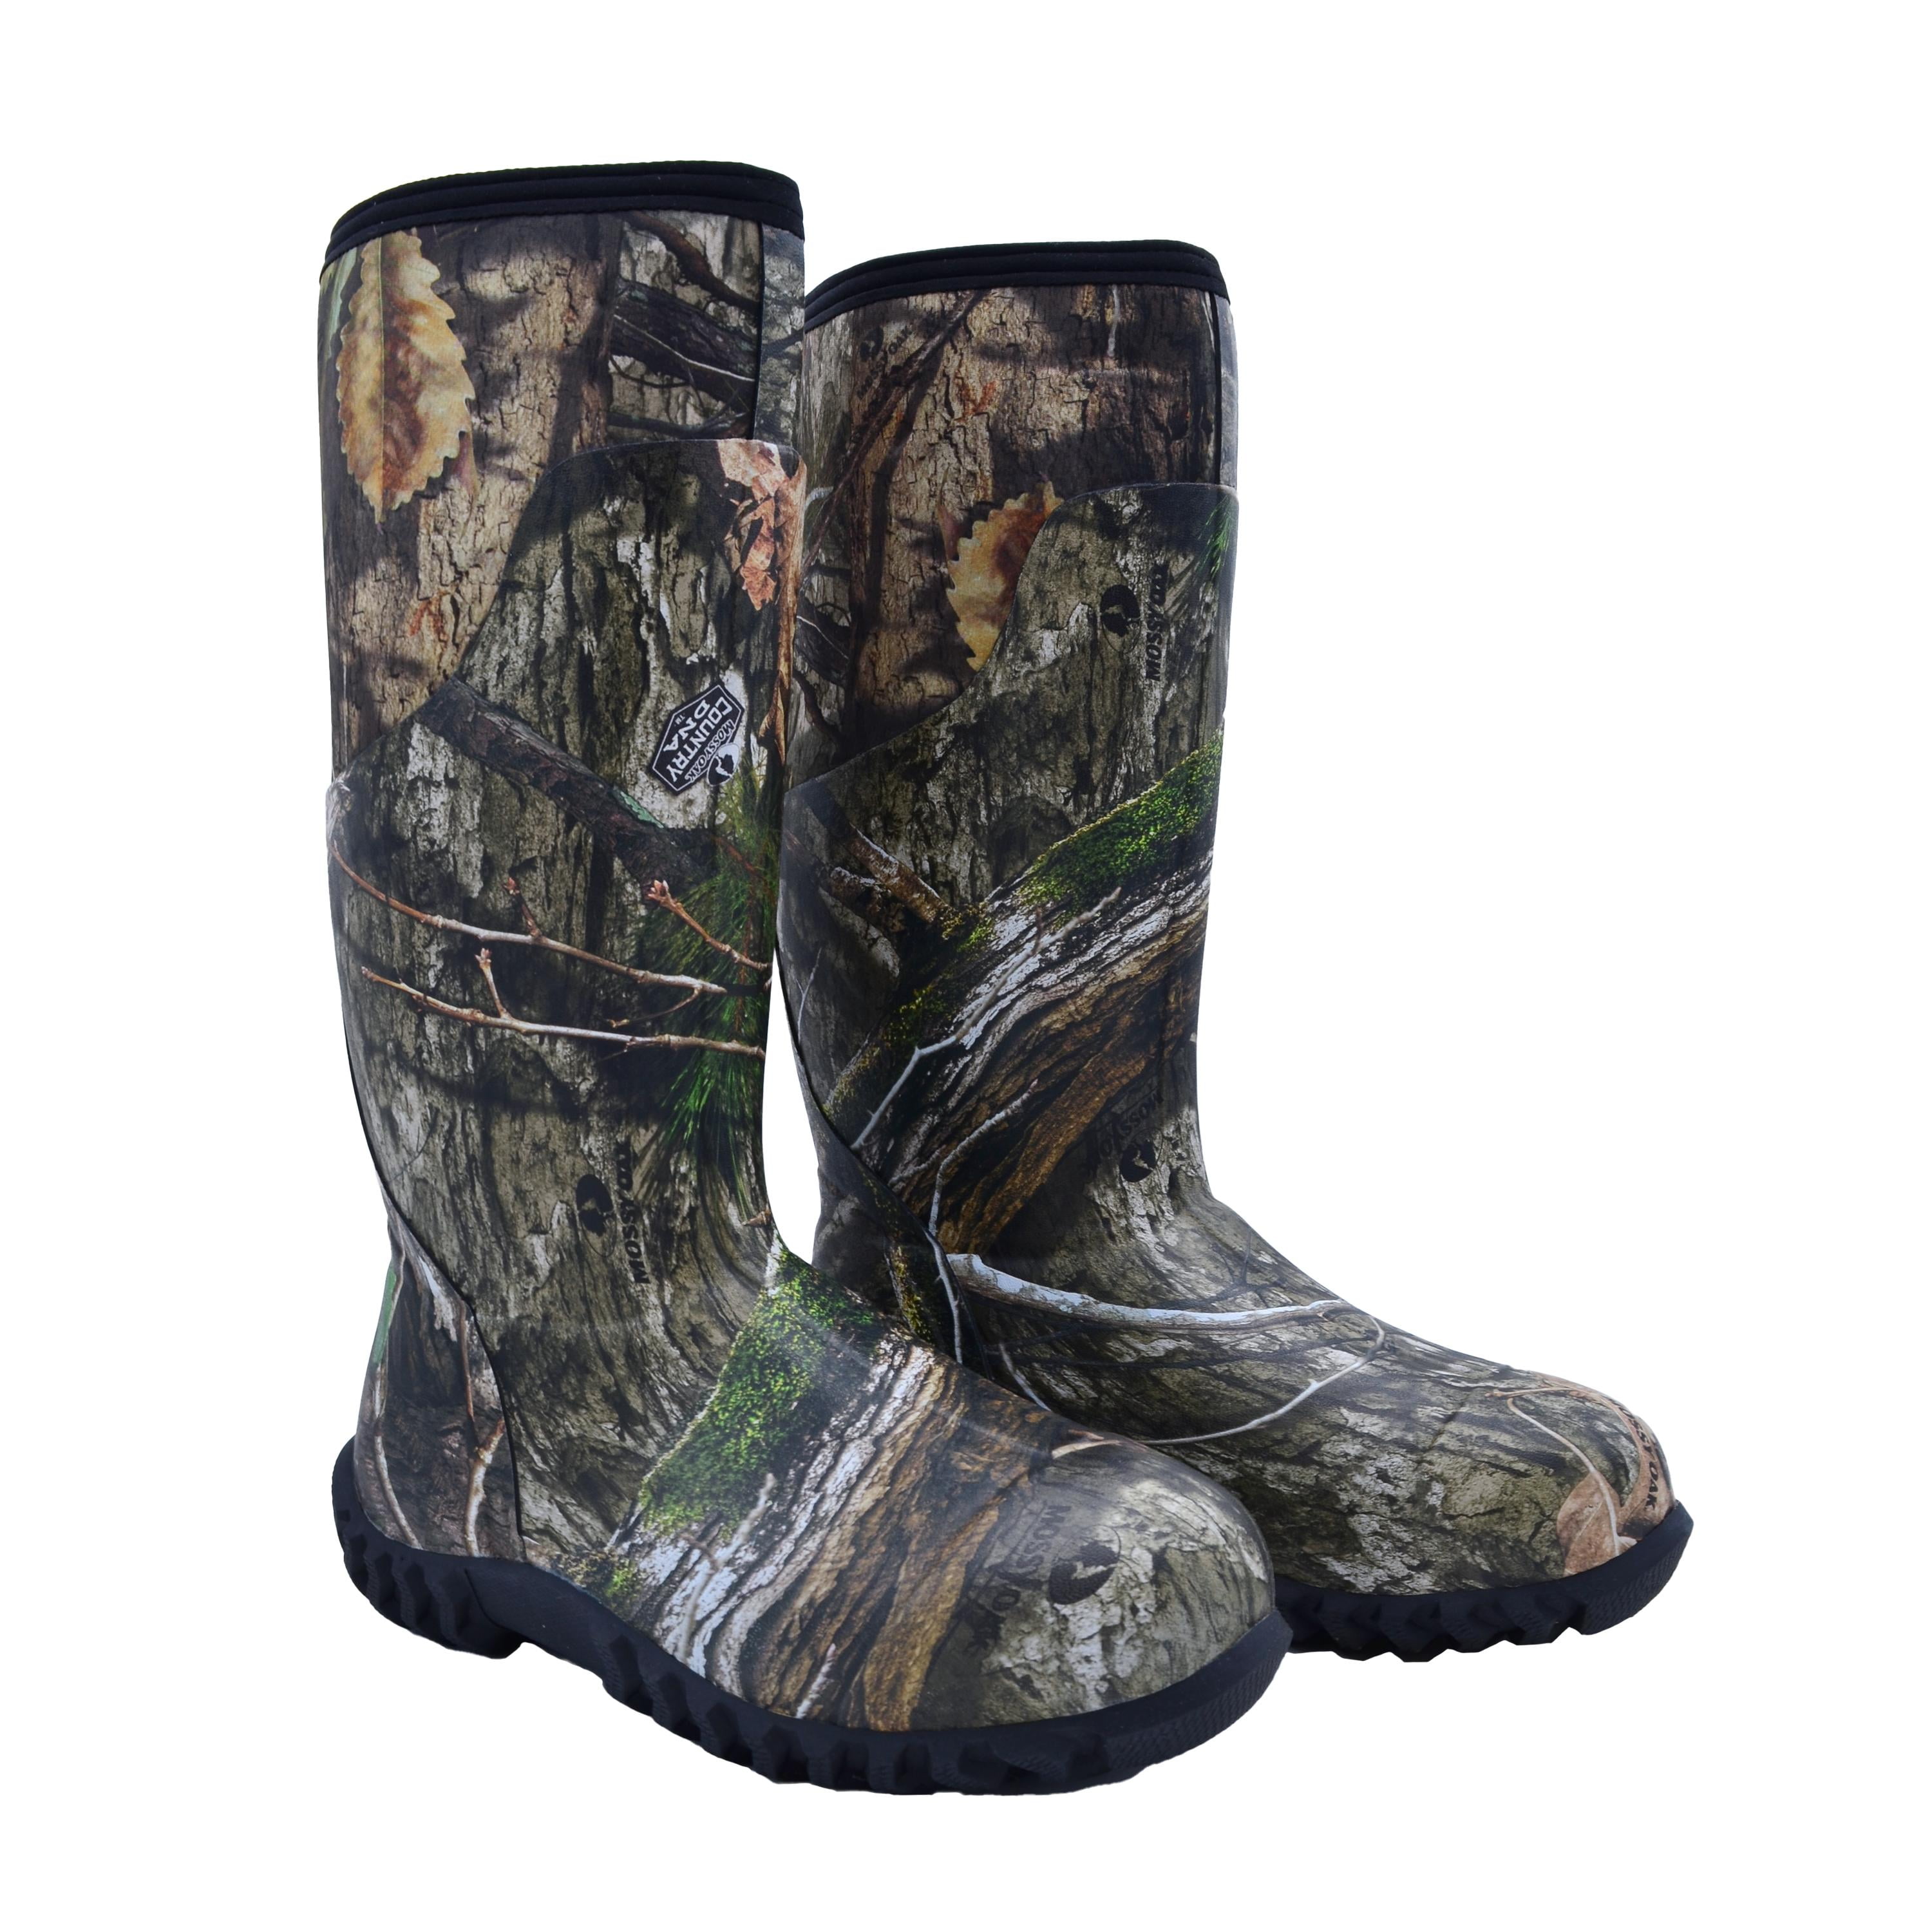 Mossy Oak Insulated Hunting Boot, Mossy Oak Country DNA, Size 12 ...